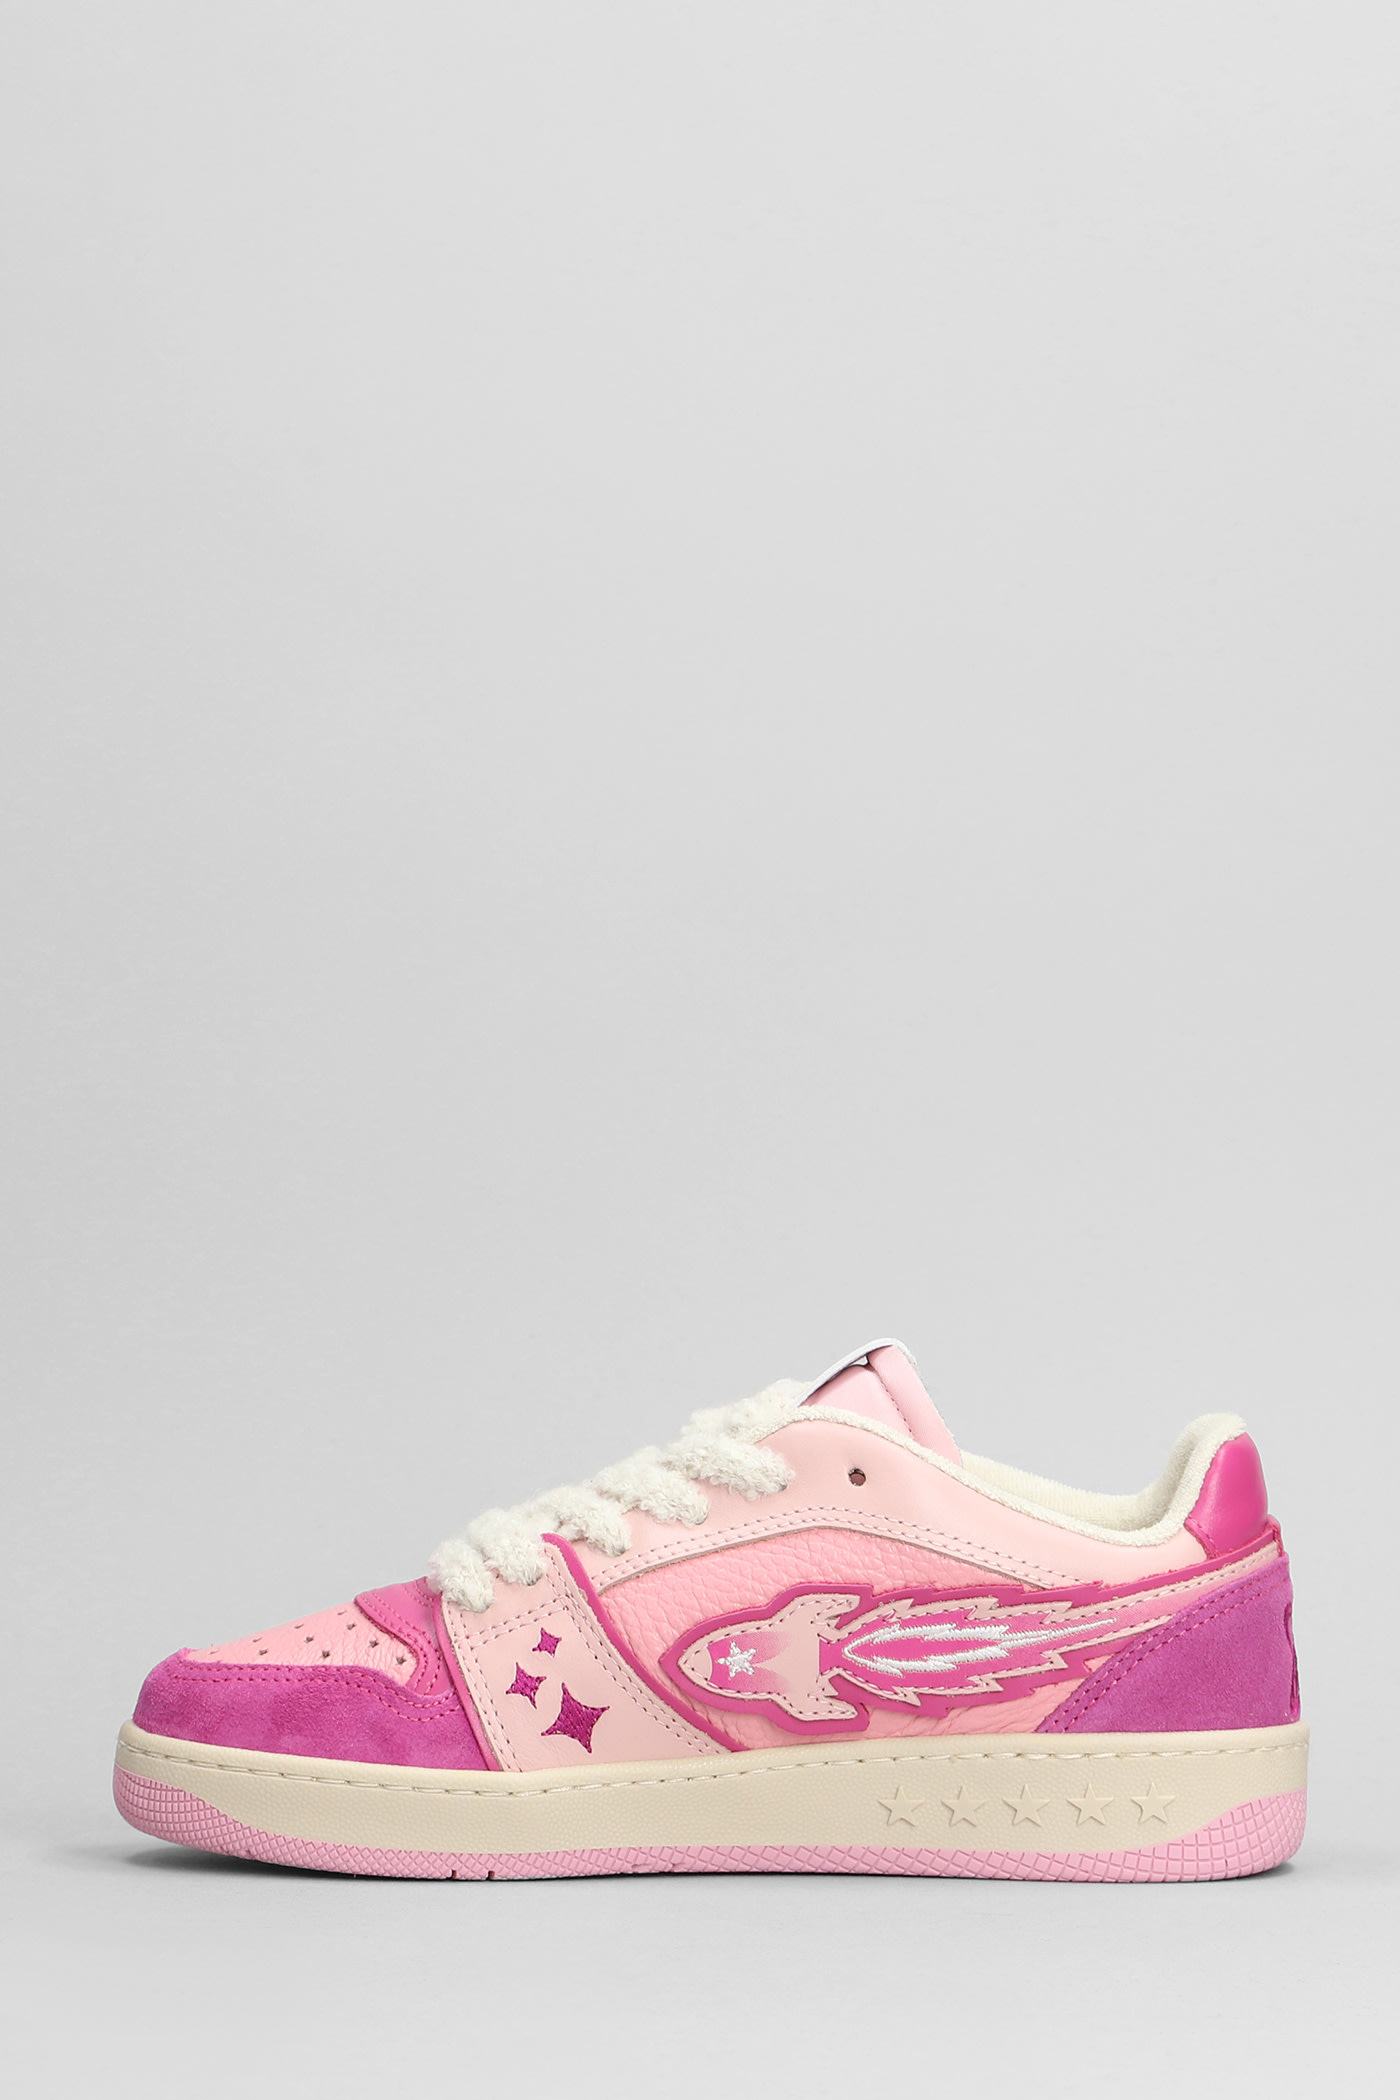 Shop Enterprise Japan Sneakers In Rose-pink Suede And Leather